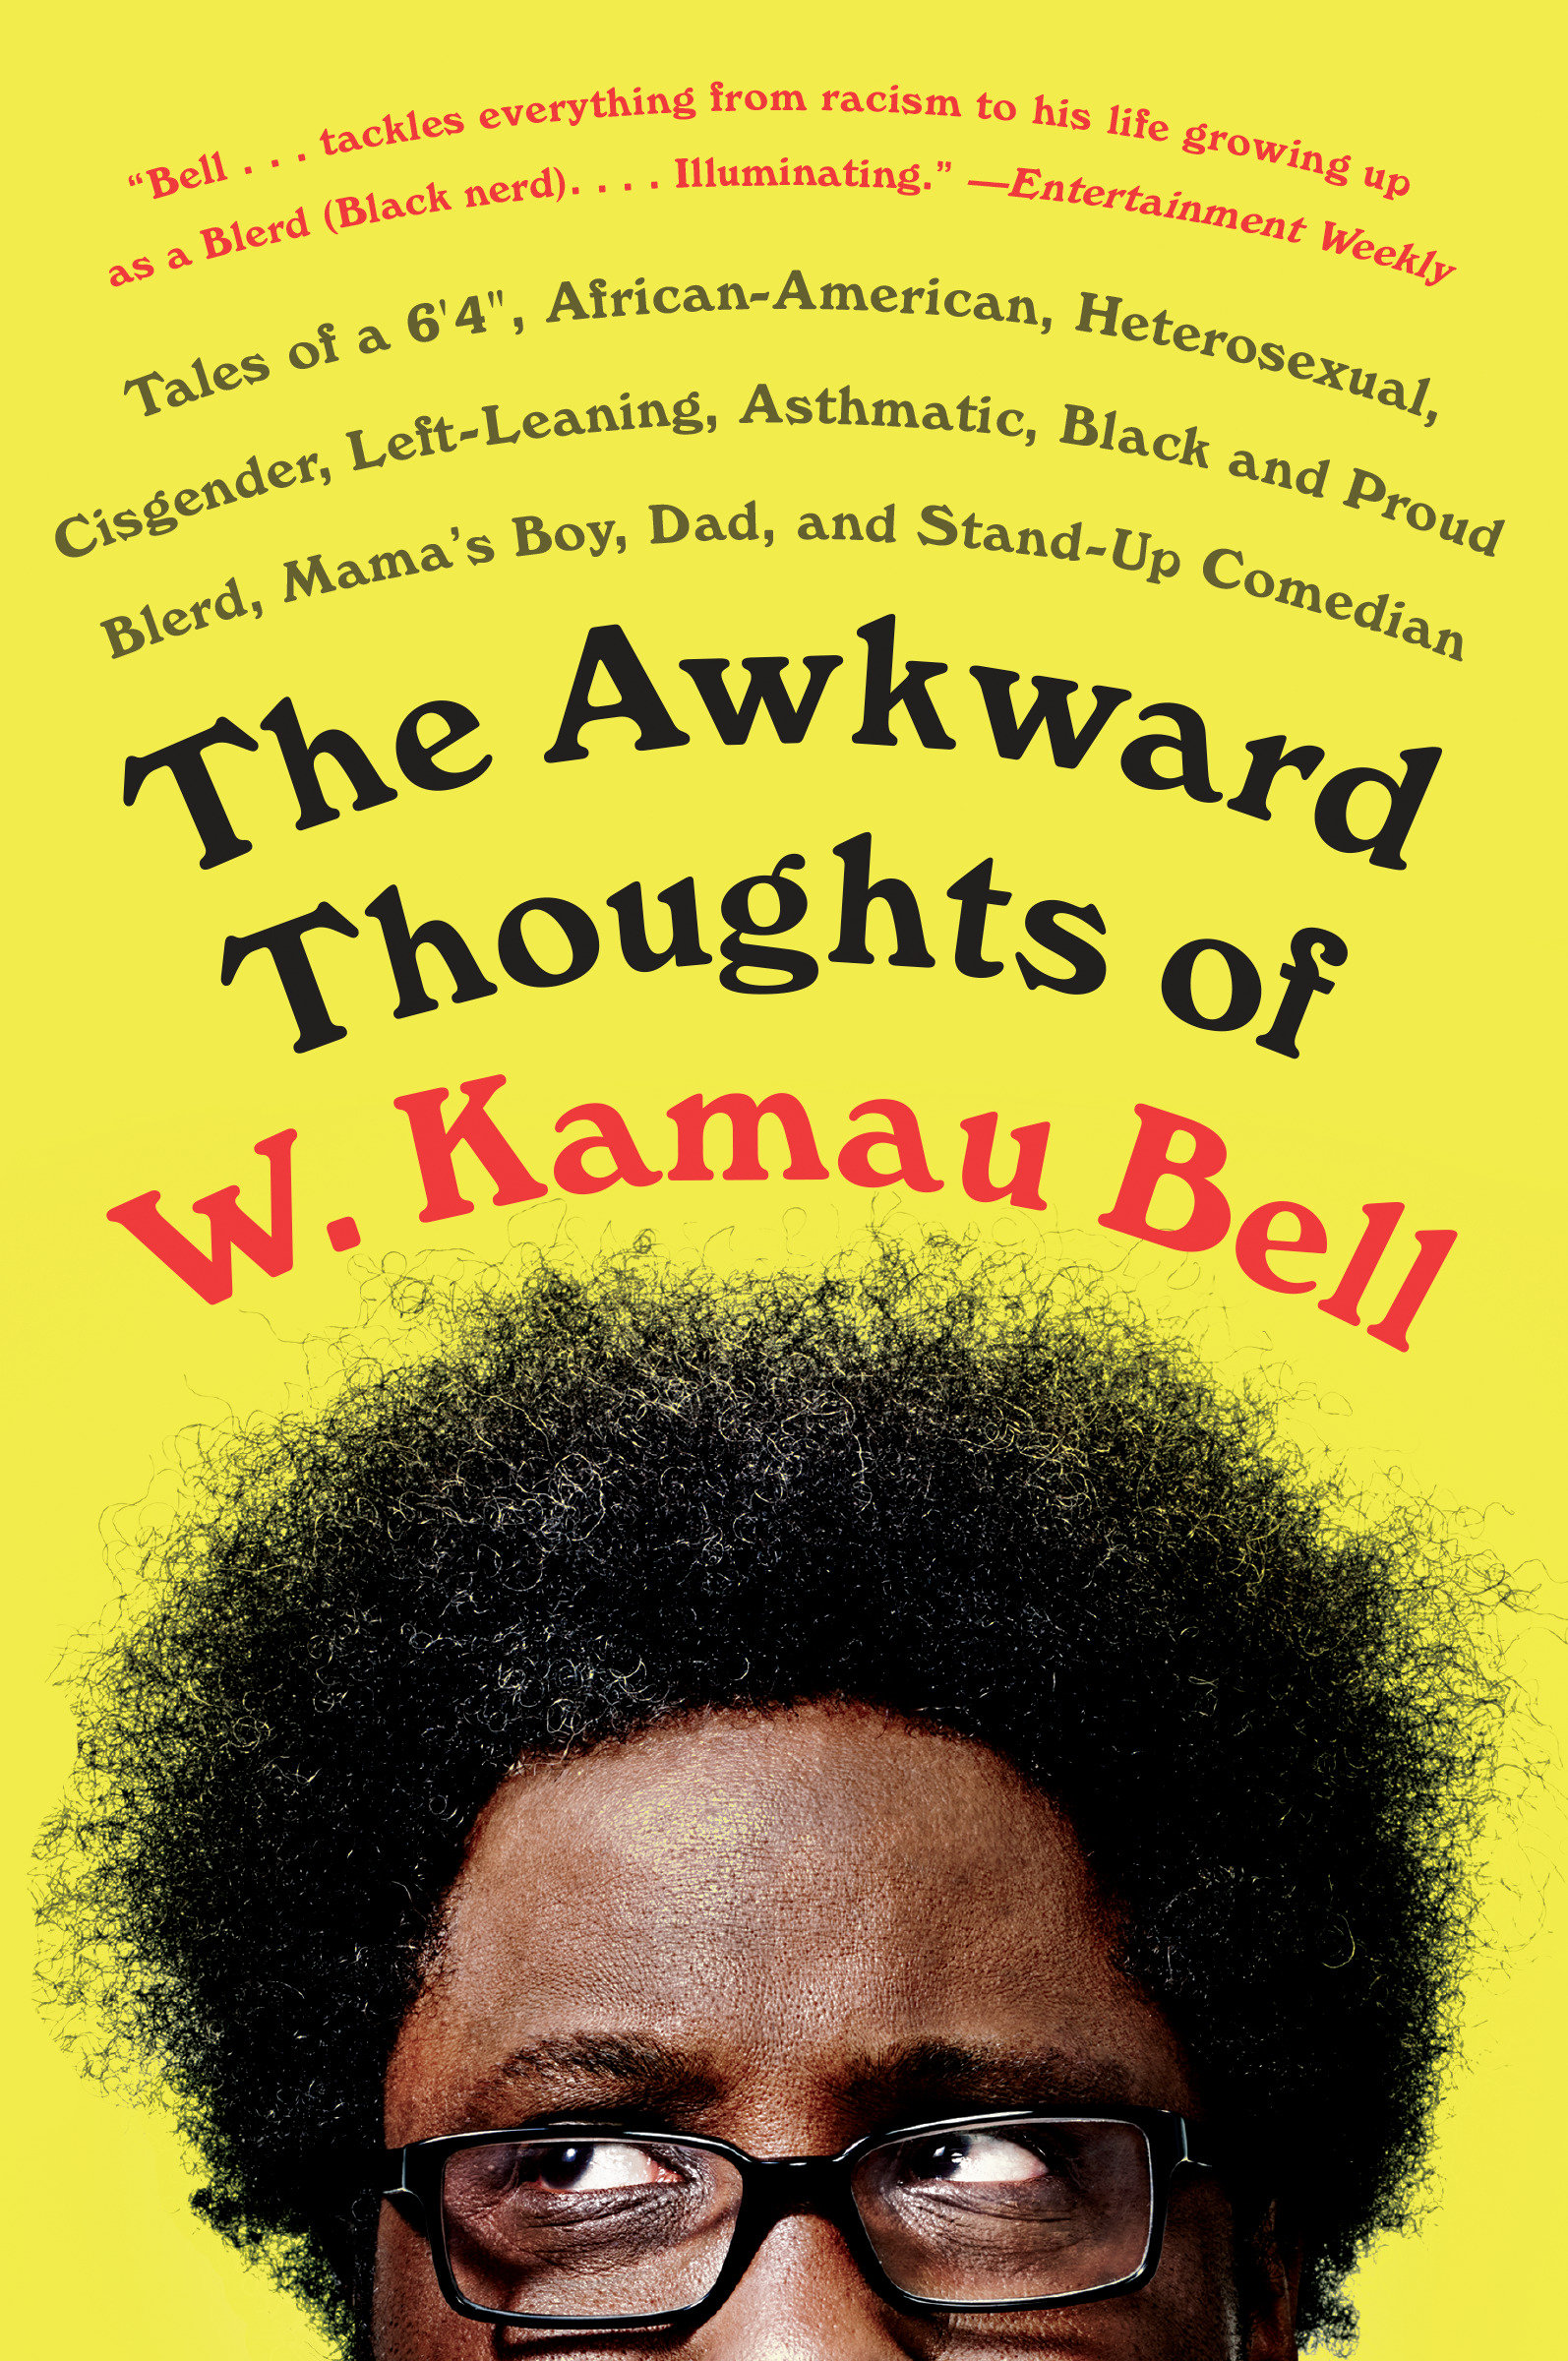 The awkward thoughts of W. Kamau Bell tales of a 6' 4", African American, heterosexual, cisgender, left-leaning, asthmatic, Black and proud blerd, mama's boy, dad, and stand-up comedian cover image